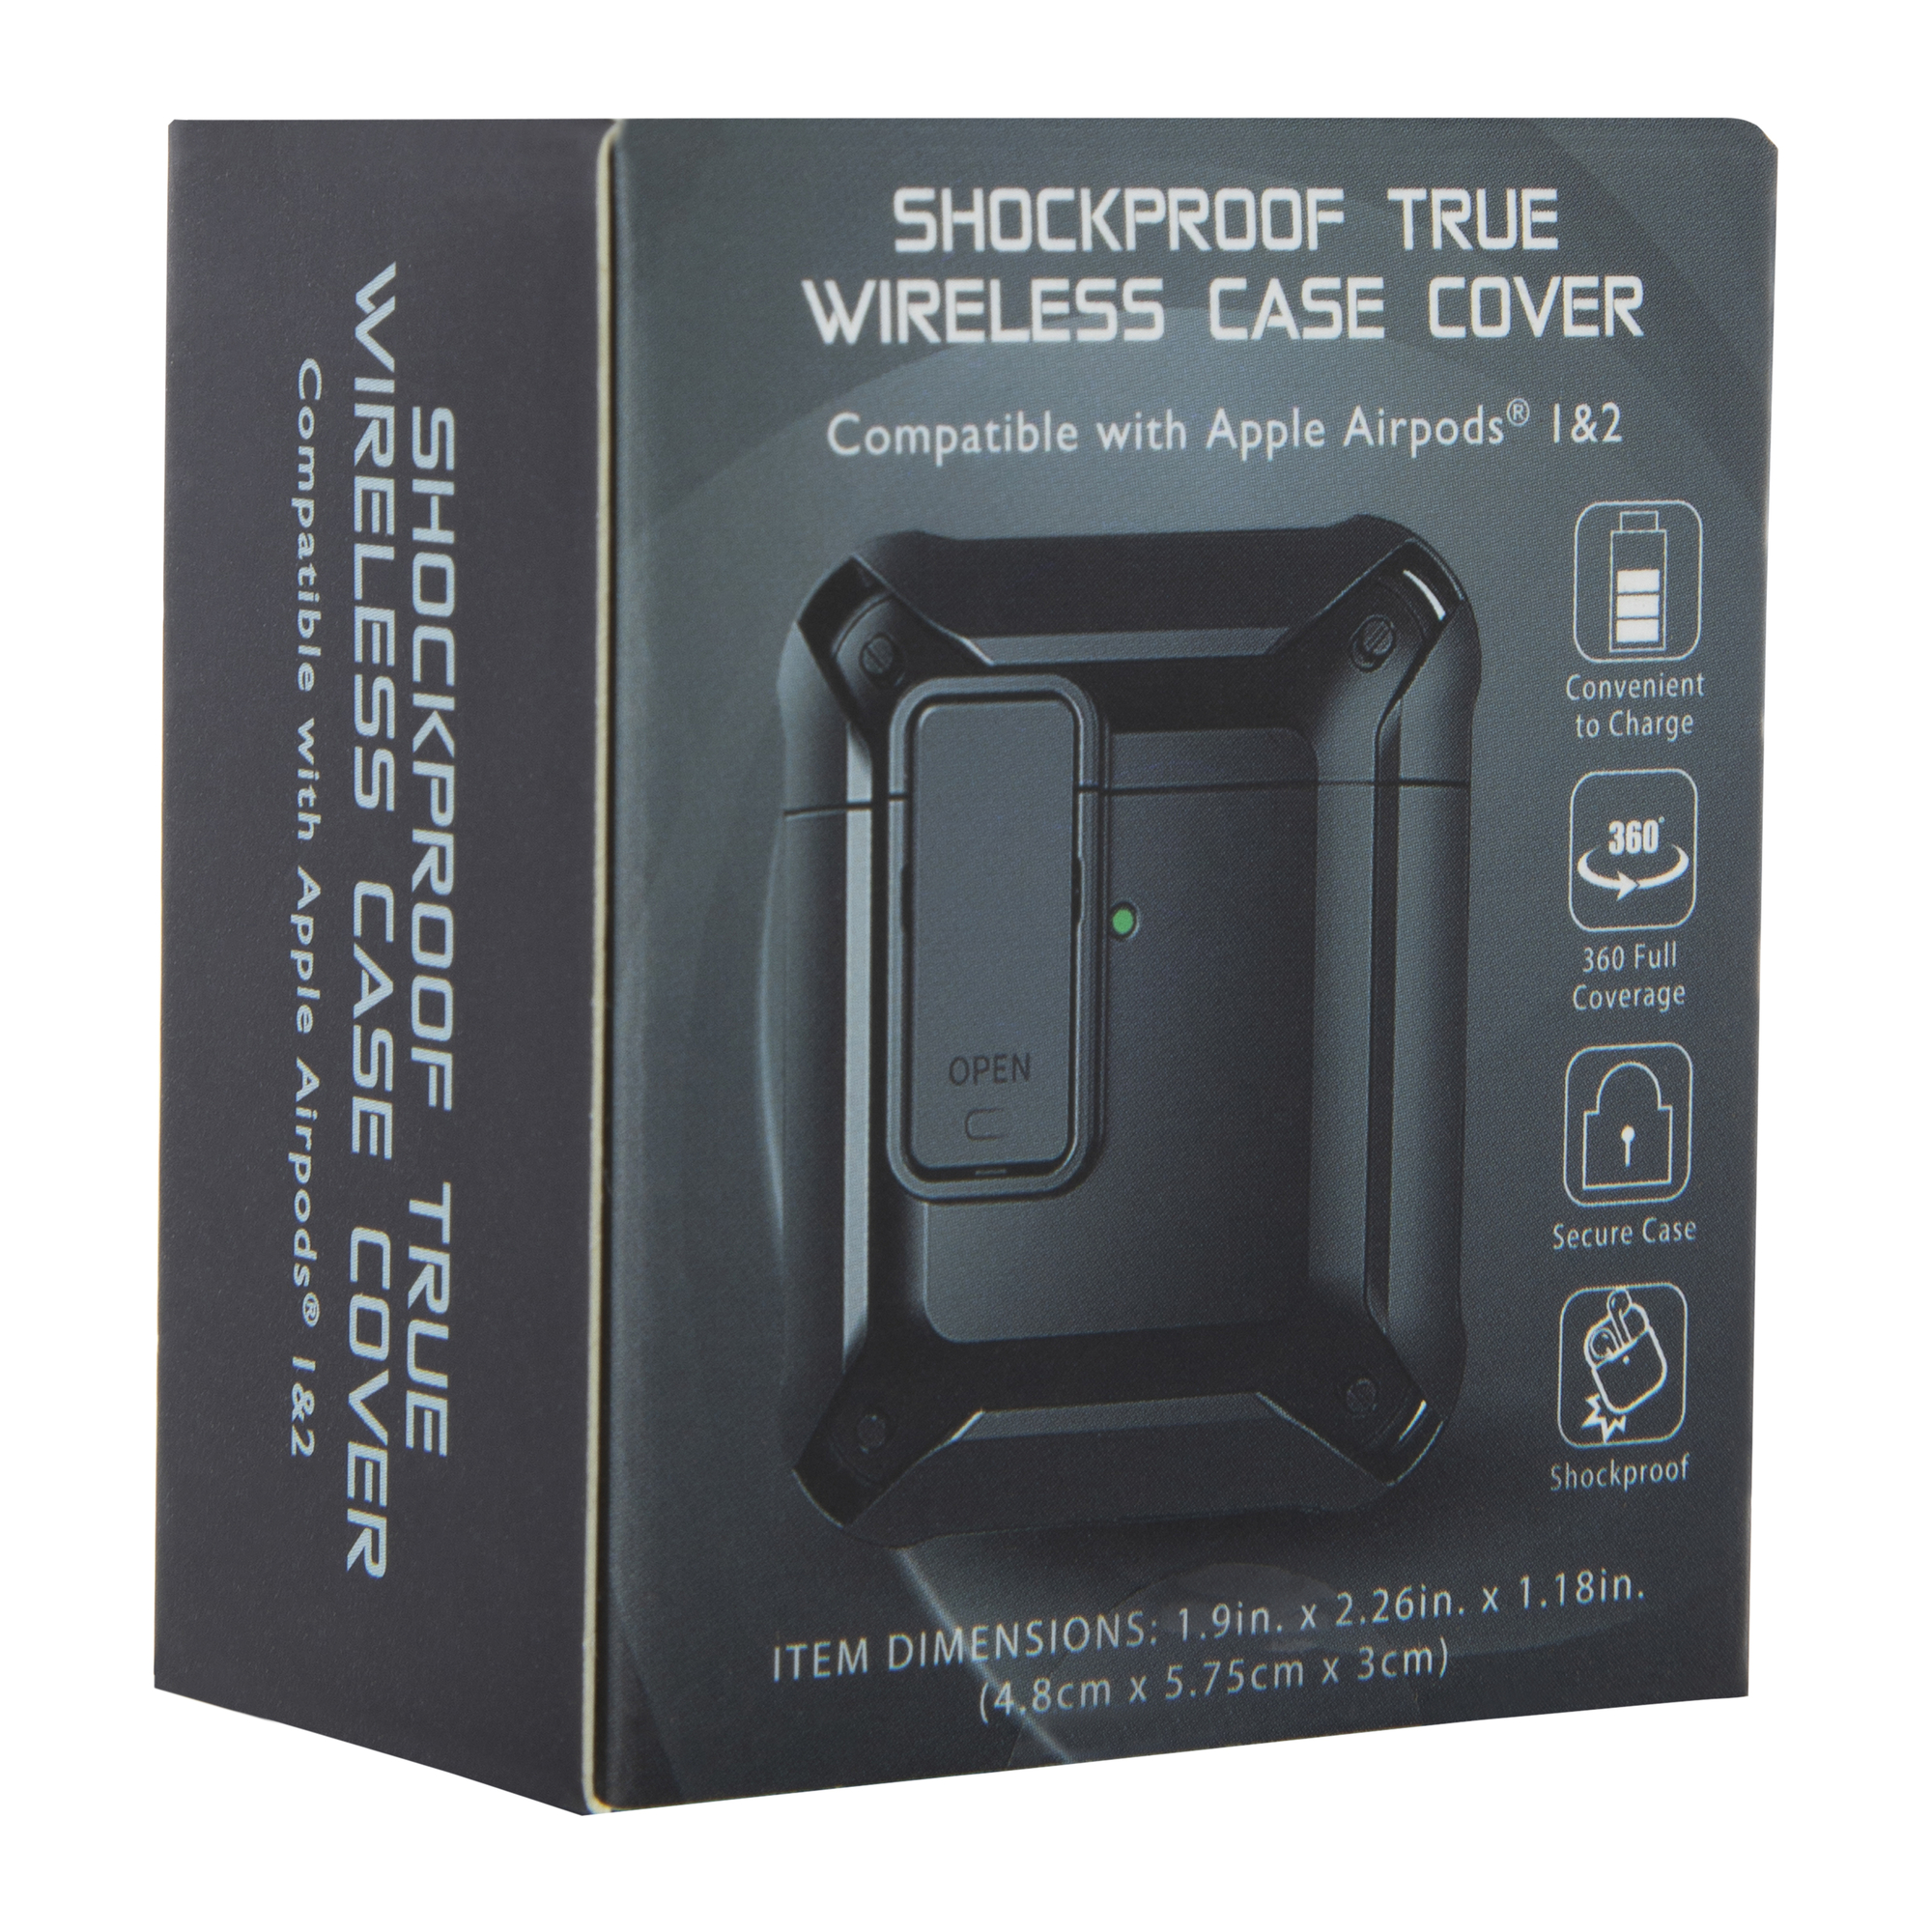 shockproof ear buds case cover for Apple AirPods®